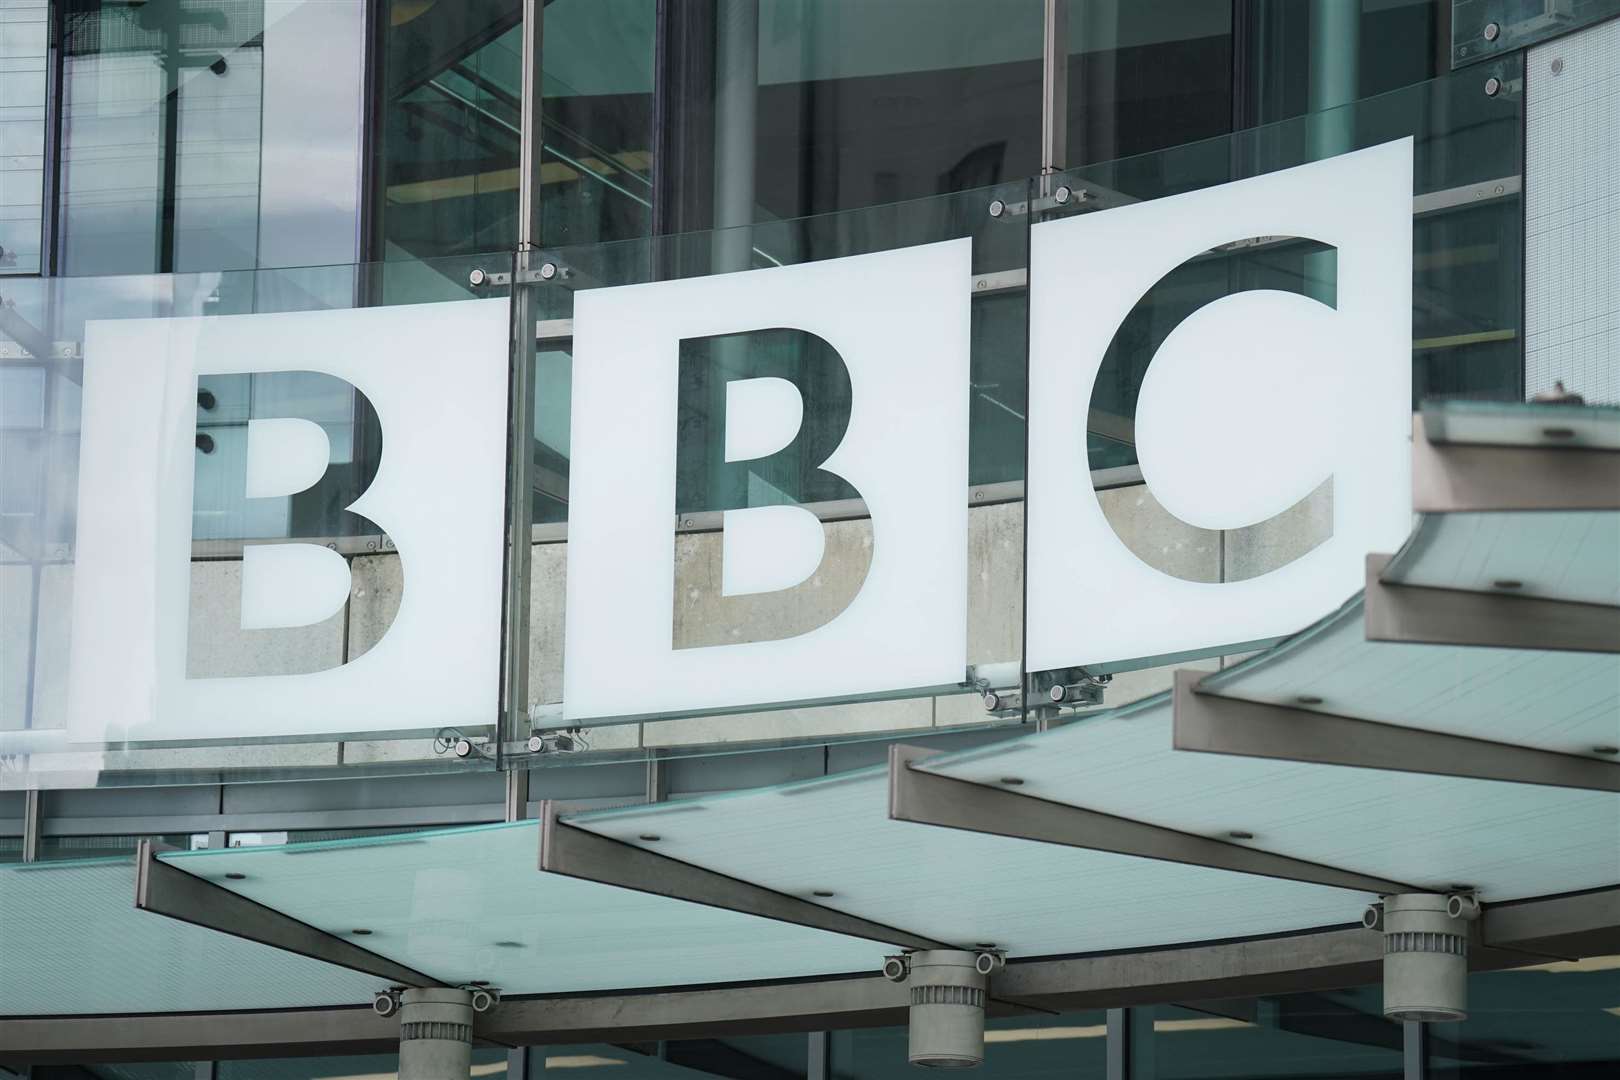 The BBC has been involved in a series of controversies lately Picture: PA